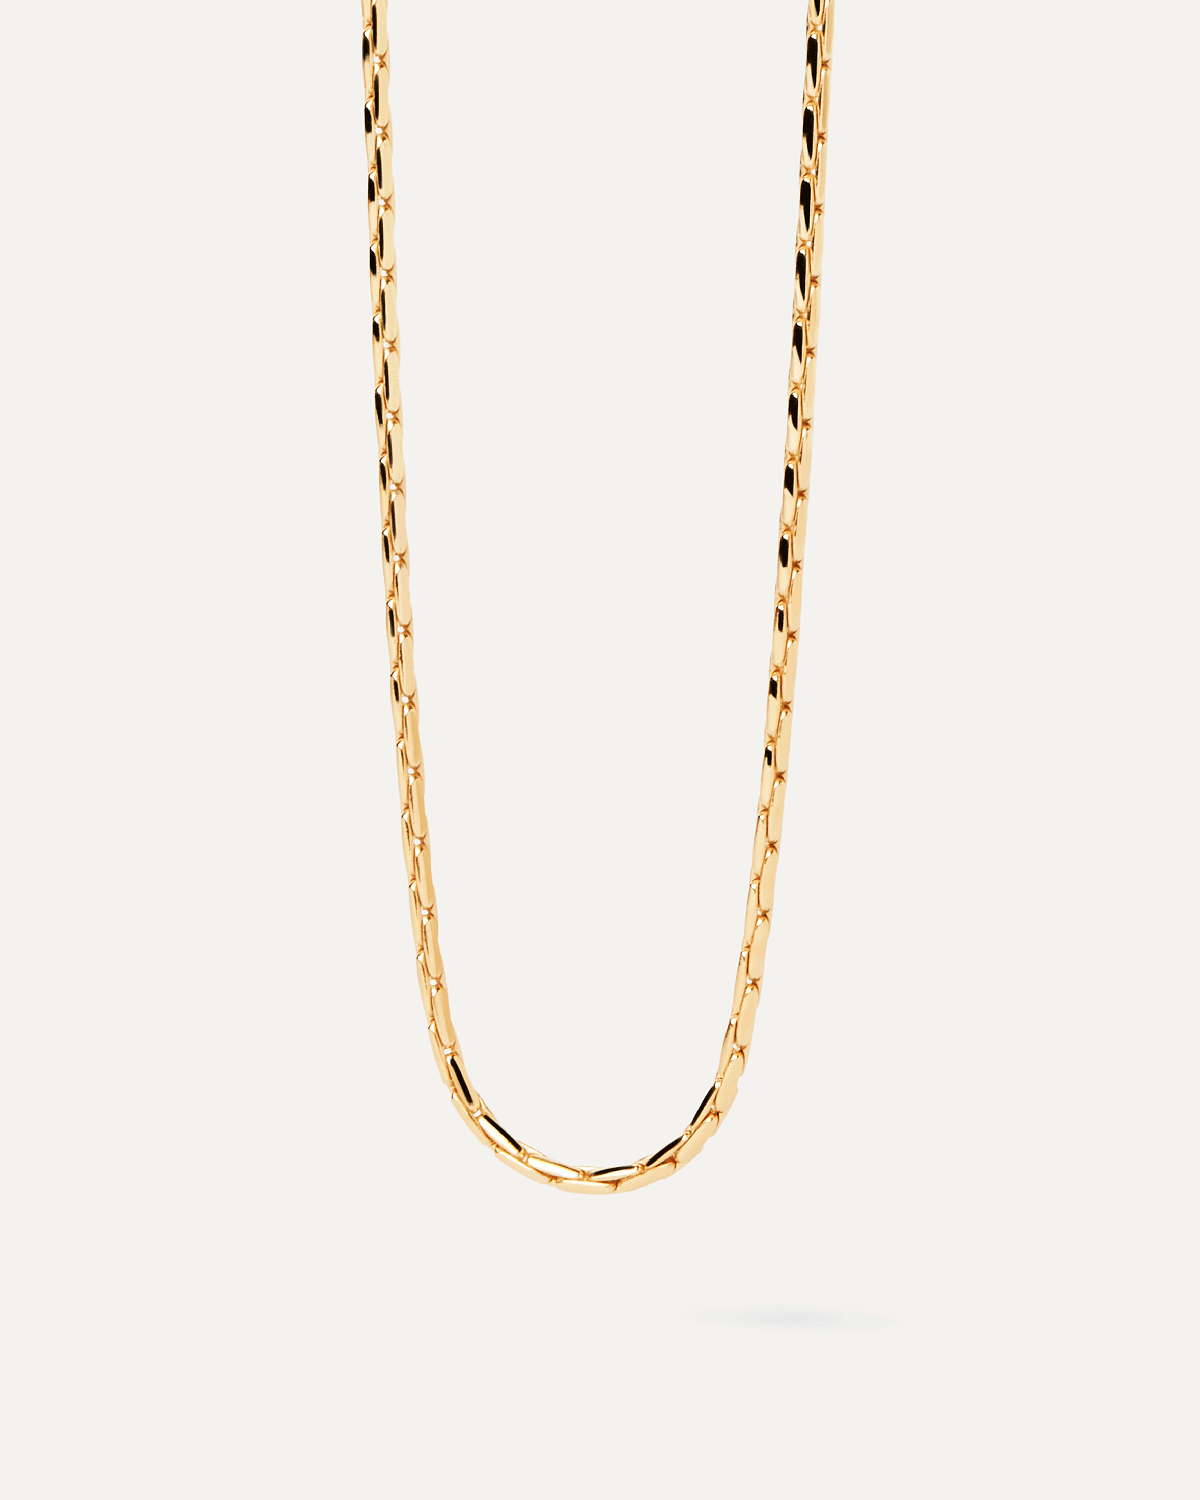 2024 Selection | Boston Chain Necklace. Gold-plated boston thick chain necklace with elongated links. Get the latest arrival from PDPAOLA. Place your order safely and get this Best Seller. Free Shipping.